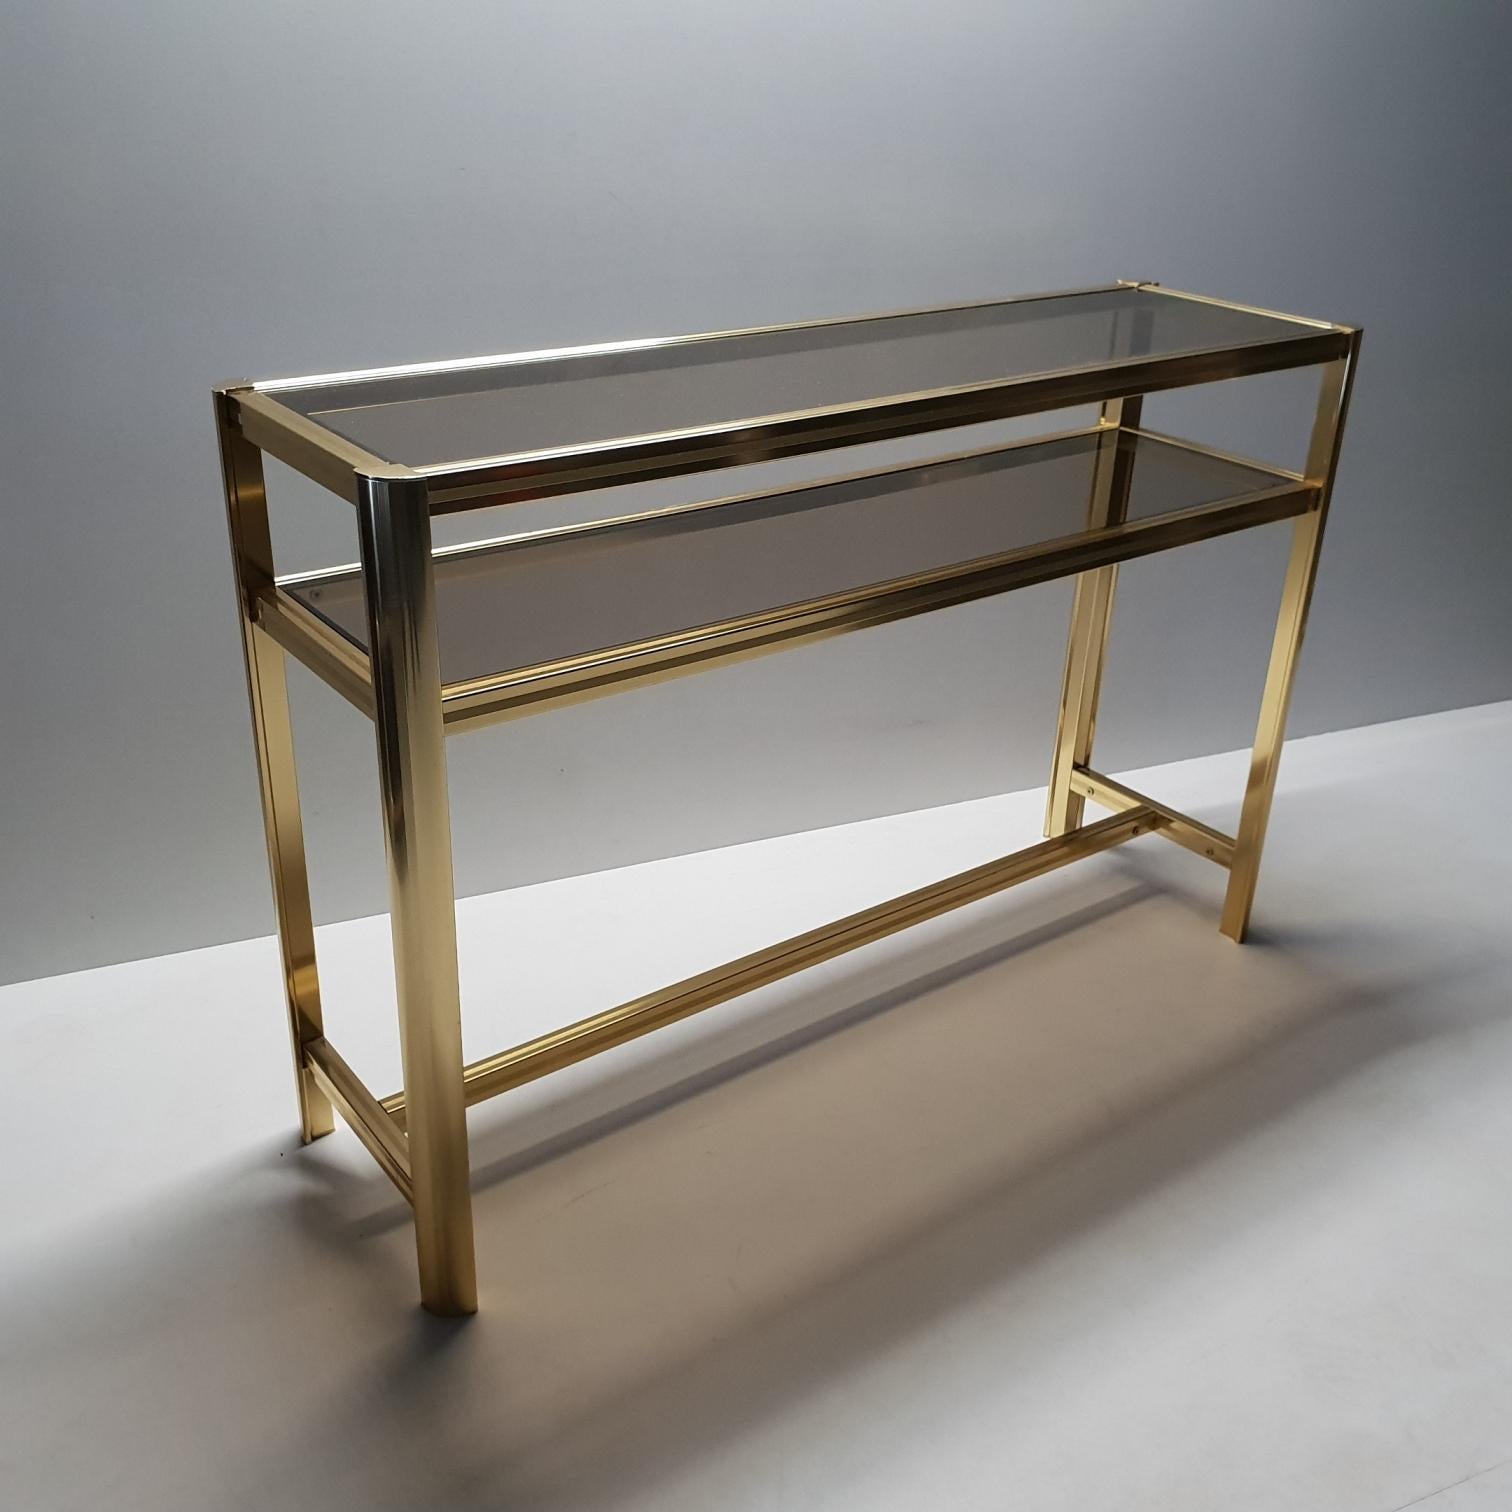 Italian Modern Gilt Brass Two Tiers Side Table with Smoked Glass, 1980s For Sale 3